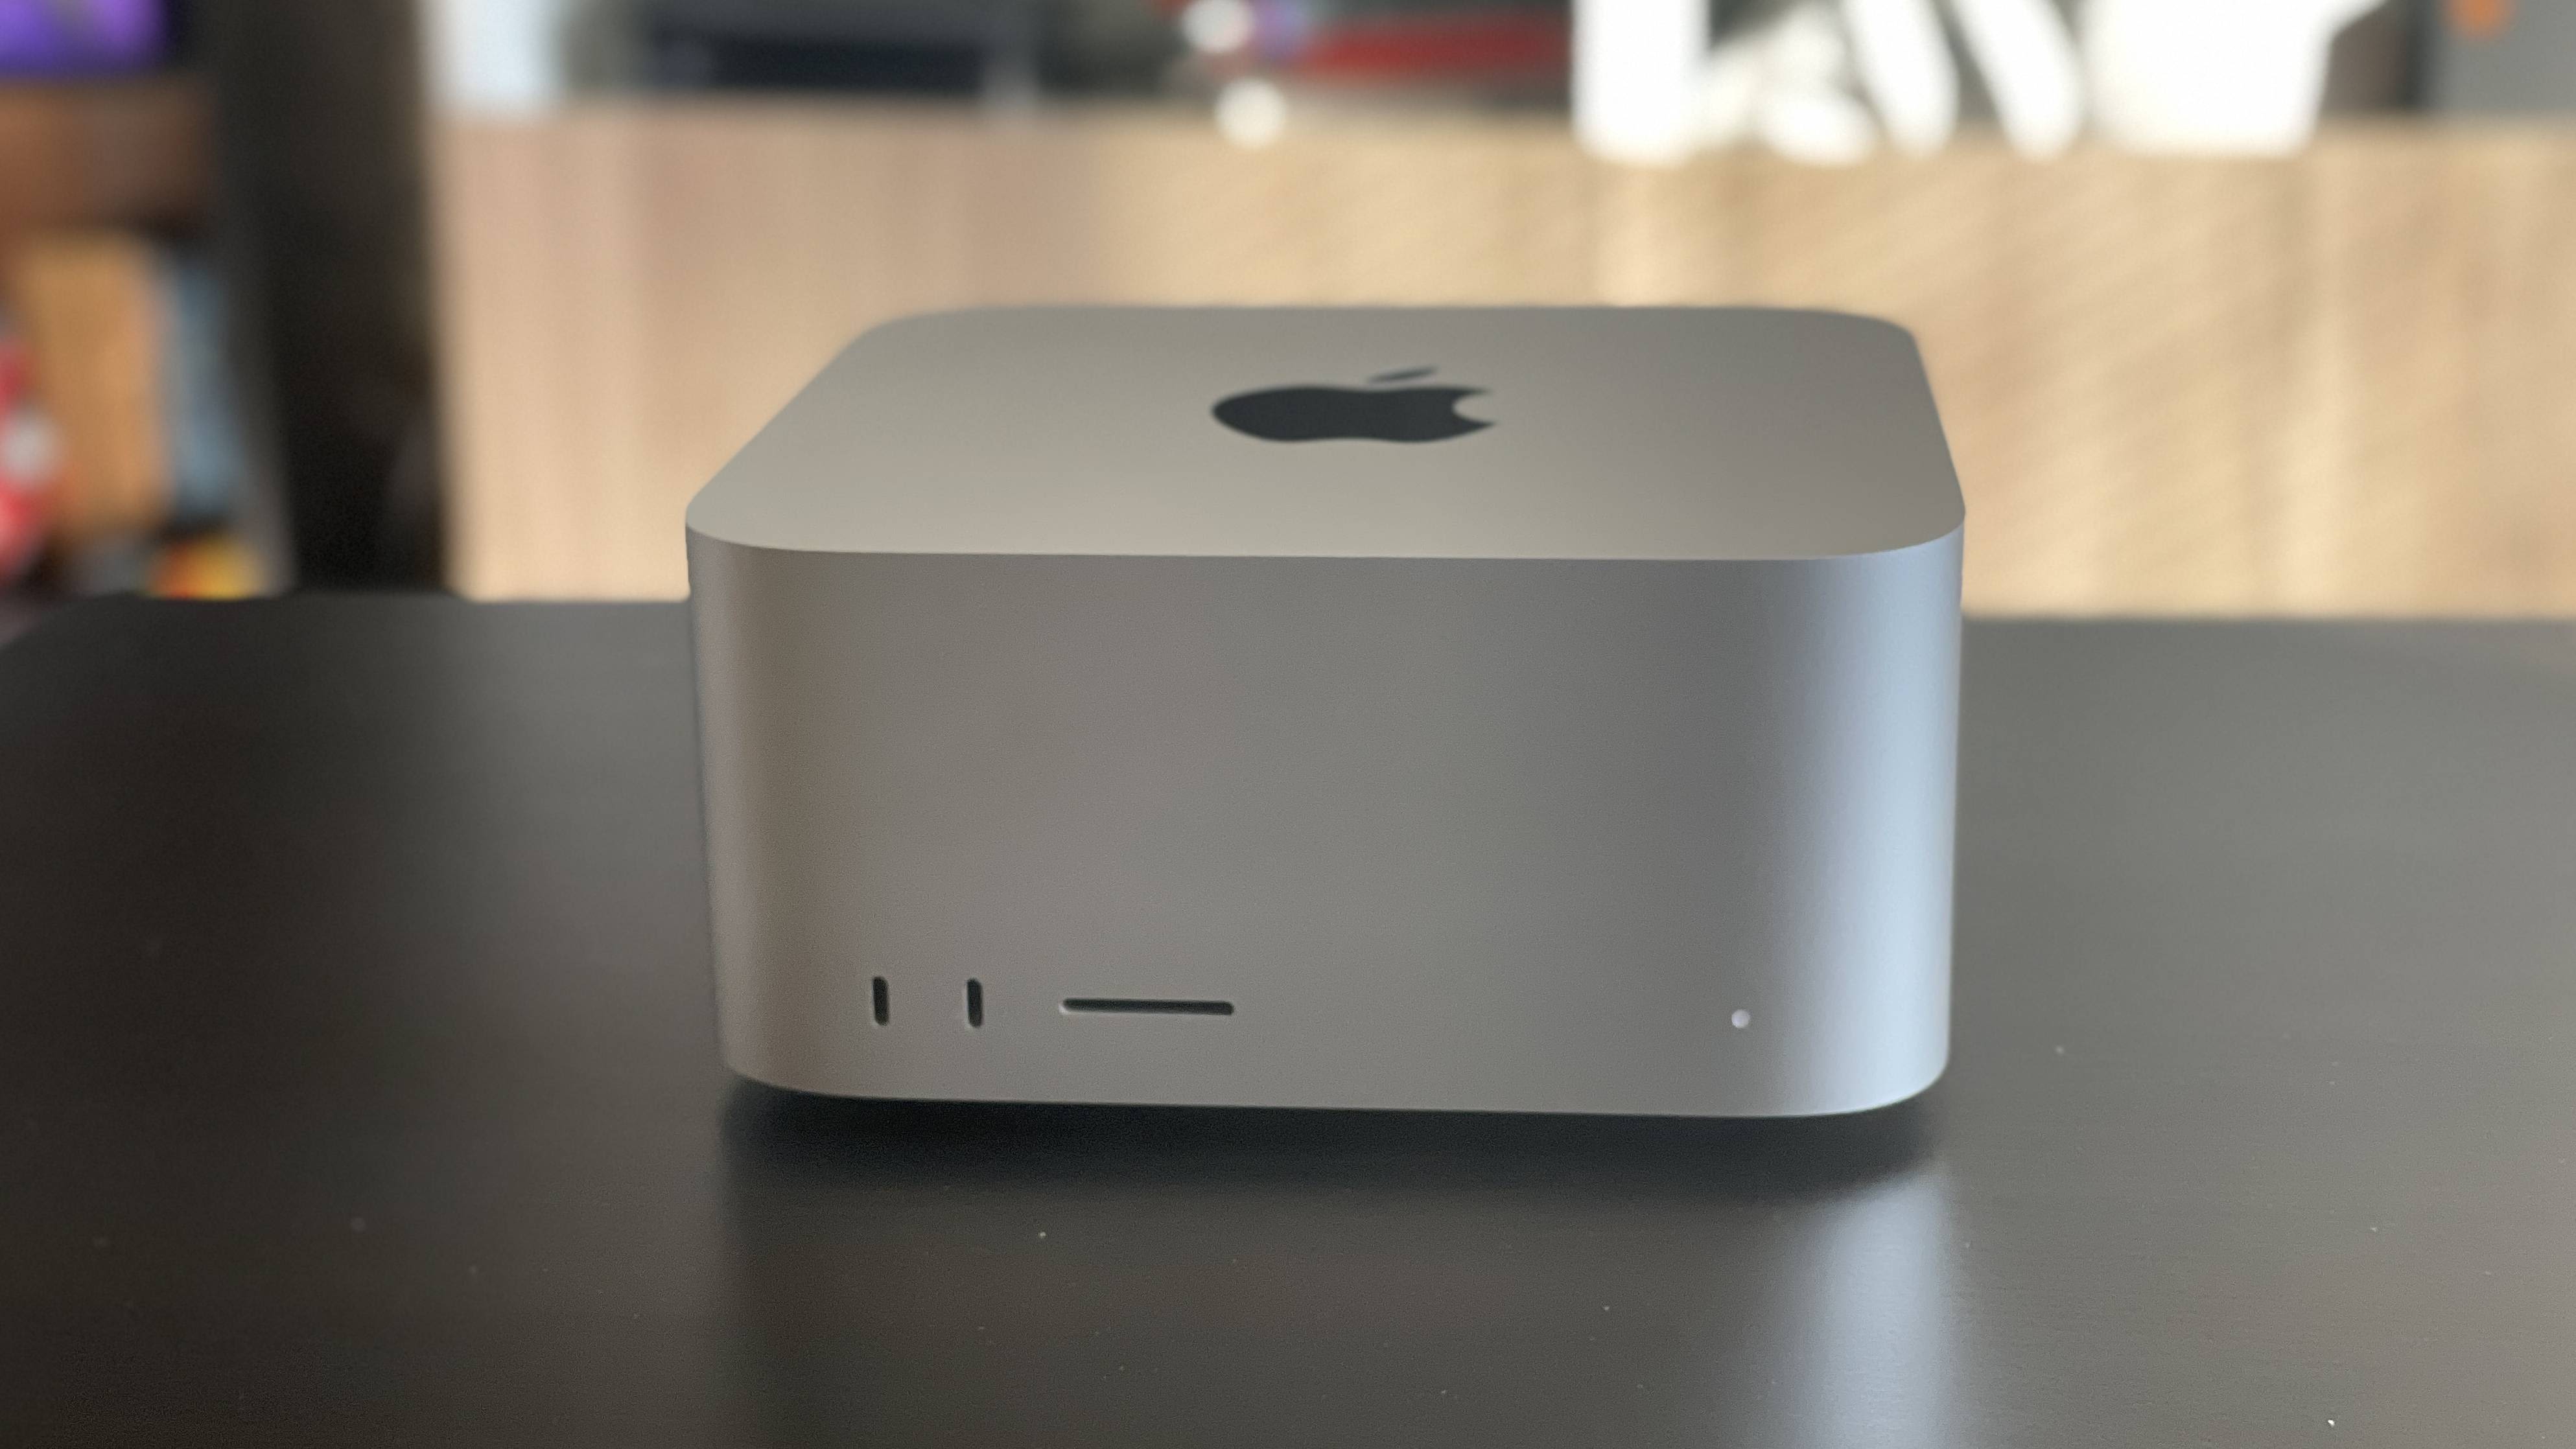 Apple Mac Studio review: Outrageous power in an ultra-compact box